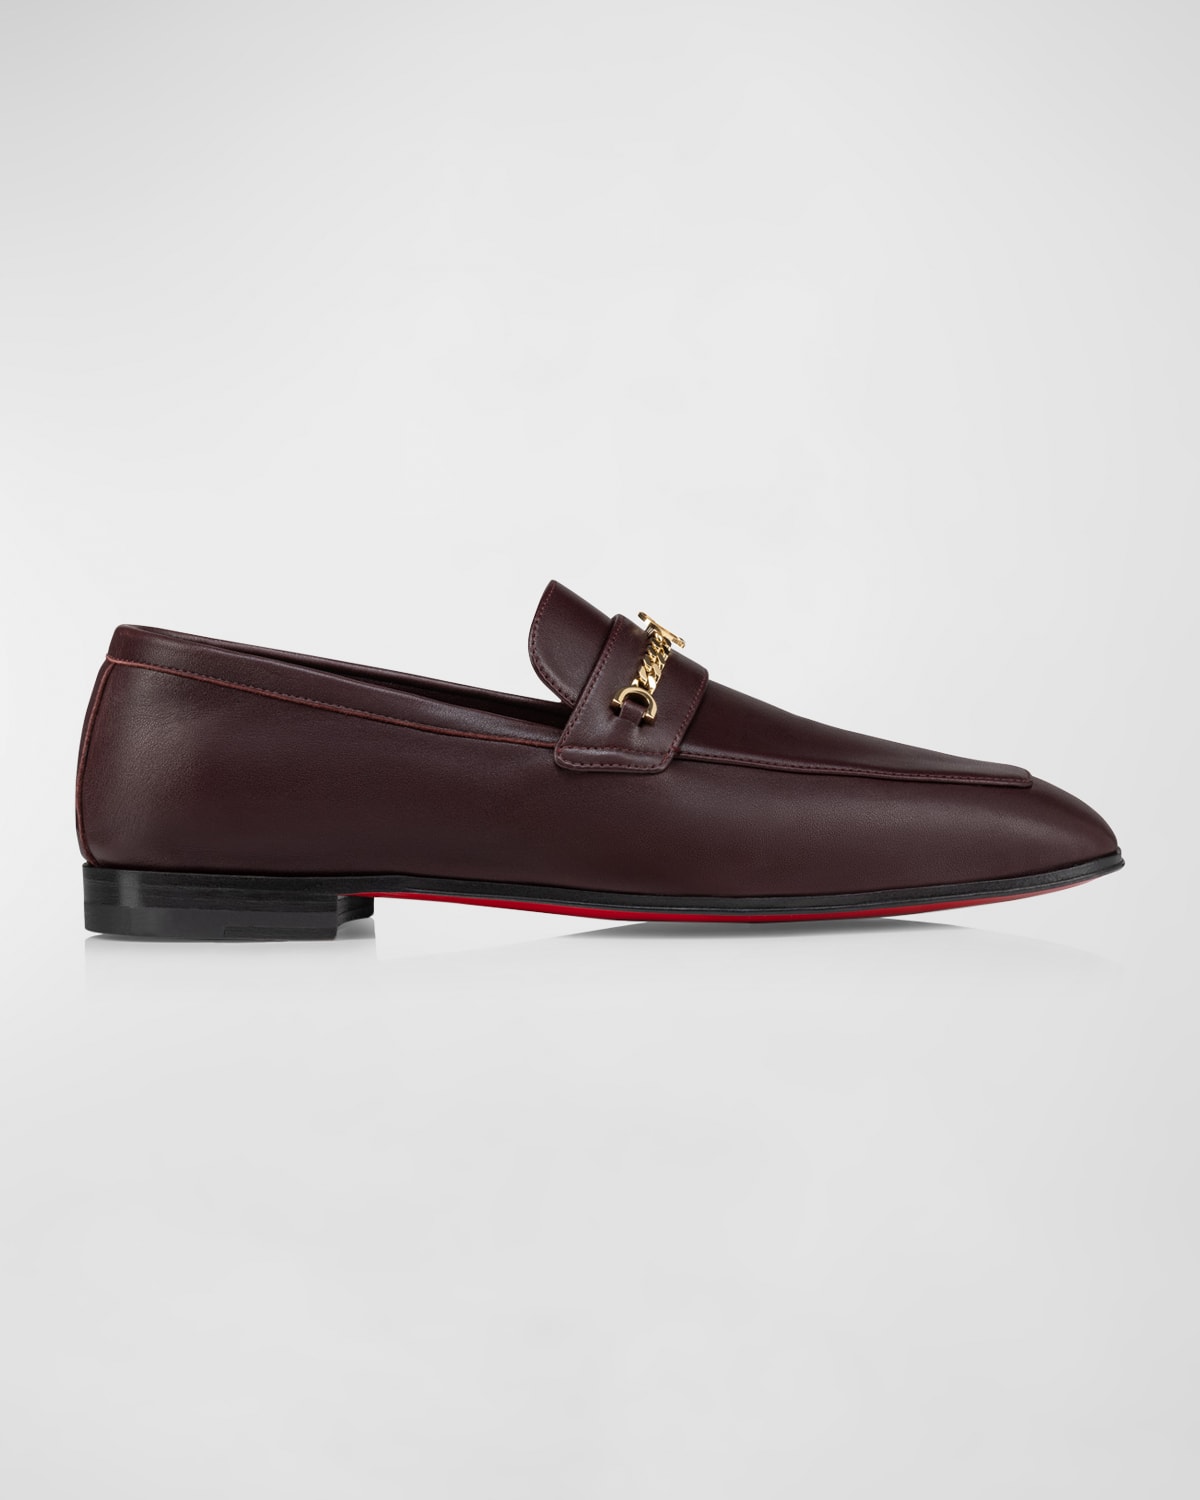 CHRISTIAN LOUBOUTIN LEATHER CHAIN RED SOLE LOAFERS